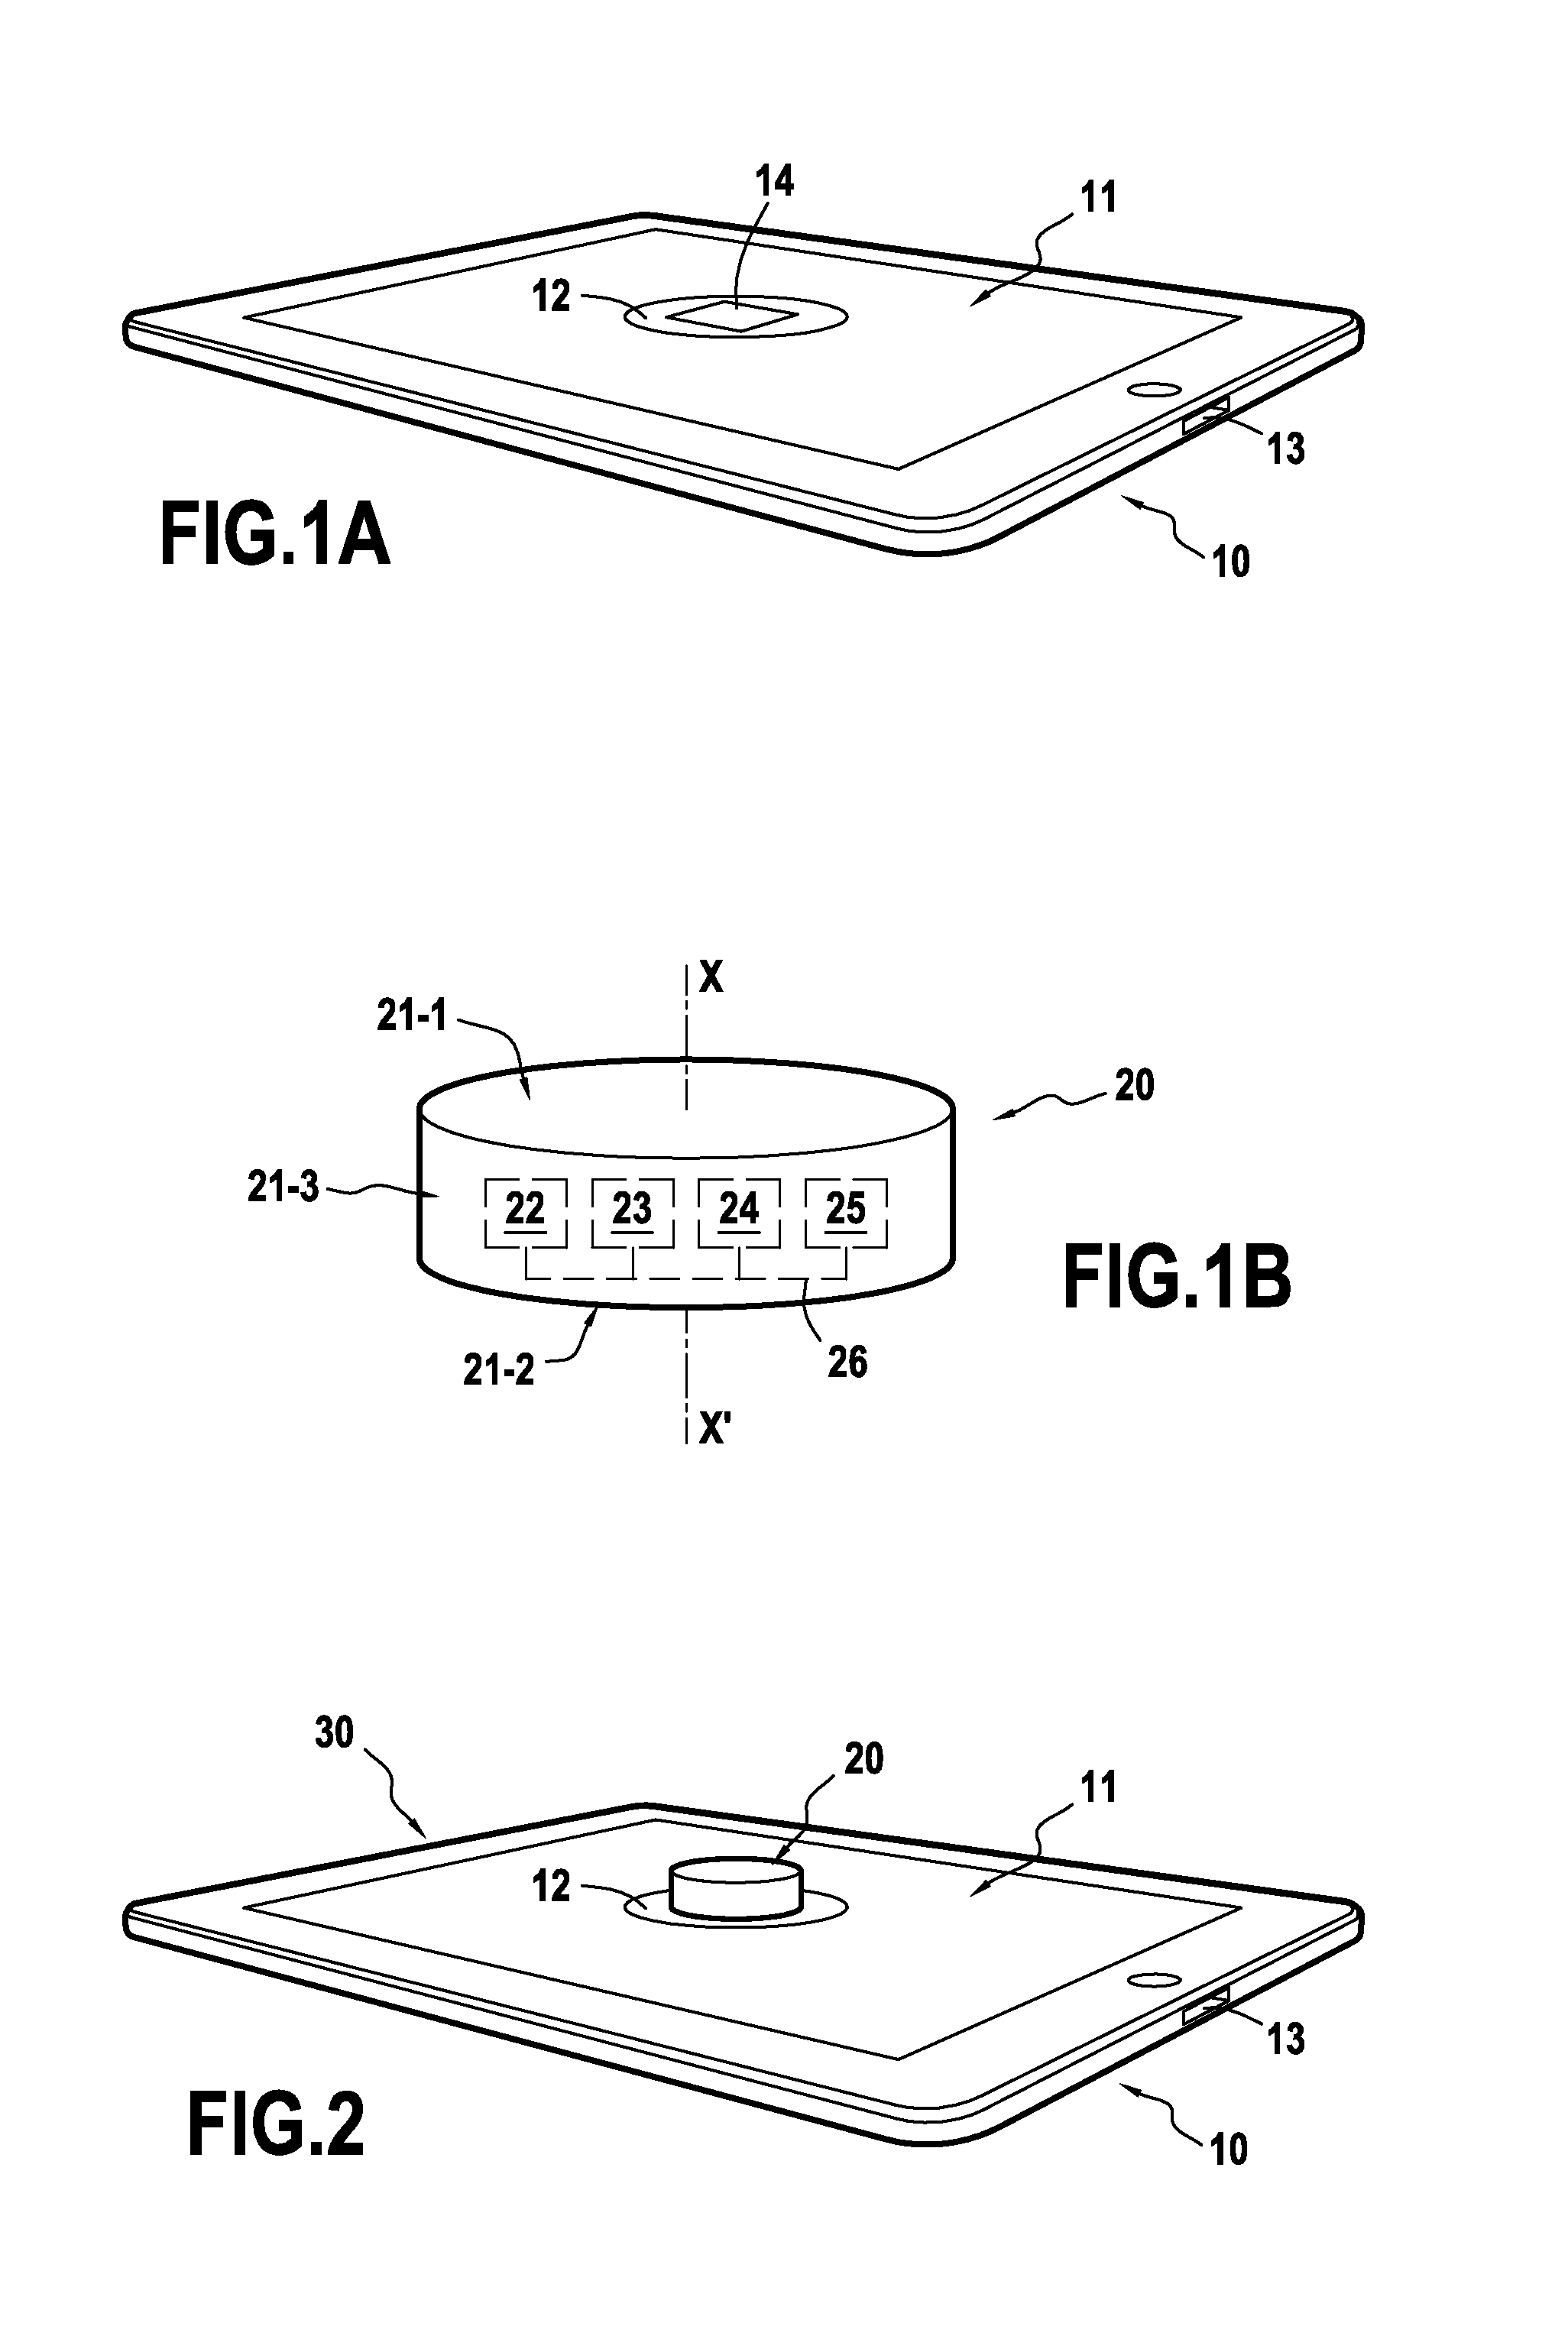 Method of authentication of at least one user with respect to at least one electronic apparatus, and a device therefor